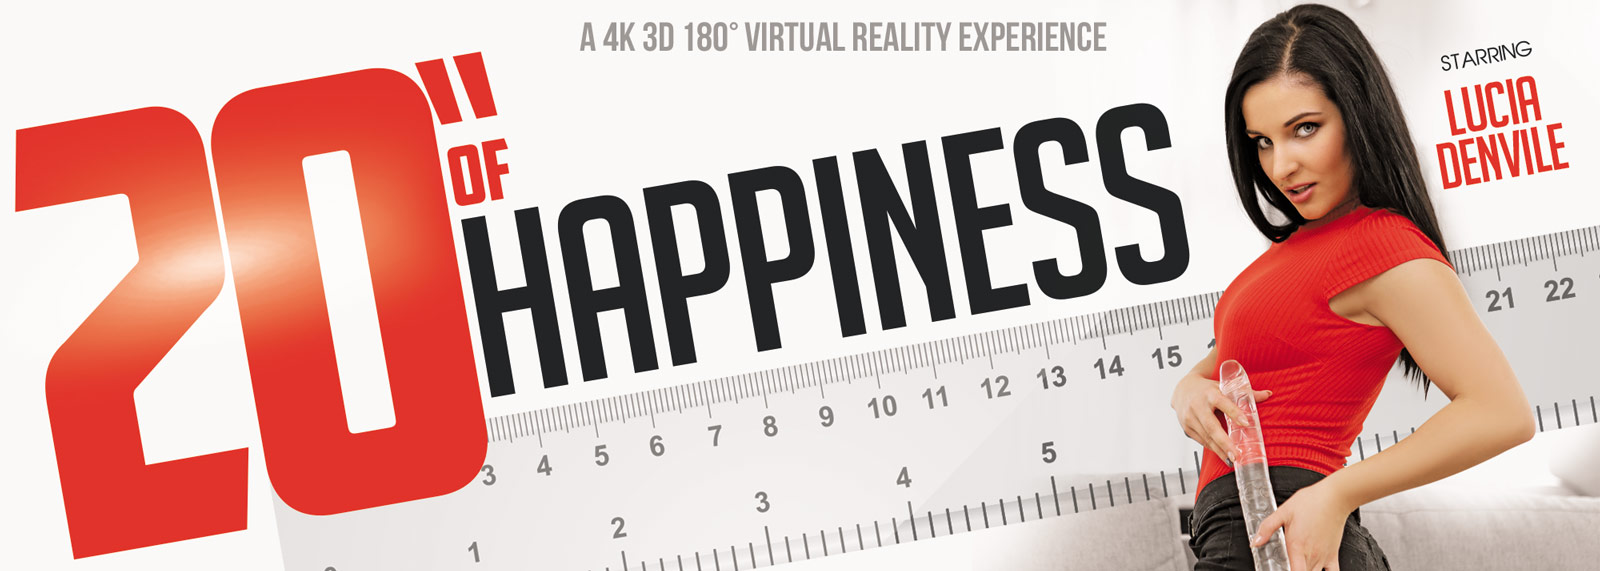 20” of Happiness - VR Porn Video, Starring: Lucia Denvile